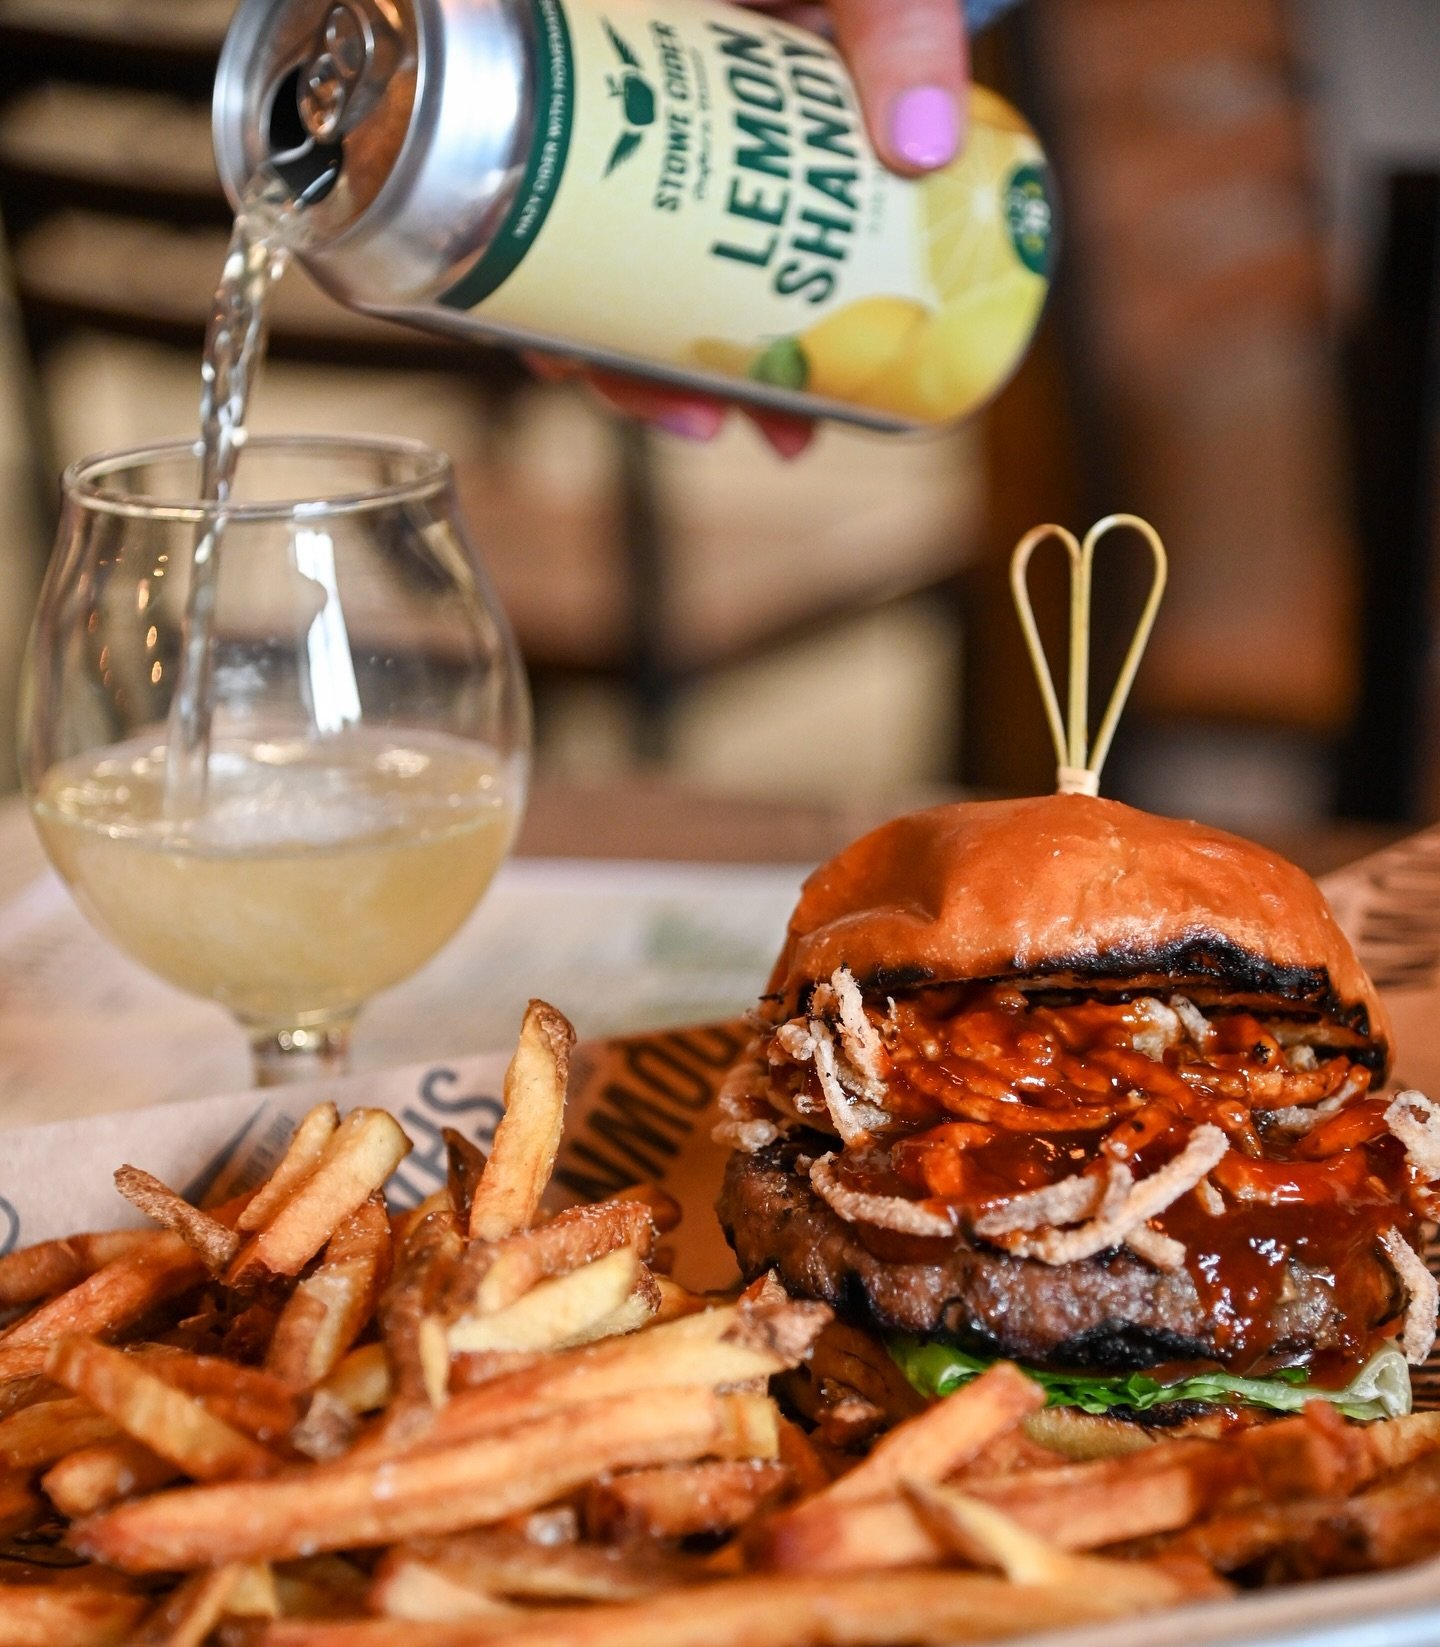 It&rsquo;s FRYday 🍟 Brighten up your day with a BBQ Burger (topped with fried onions) and a refreshing Lemon Shandy! 🍔🍋

We are open tonight until 9pm, so come on down and hang with us!

#stowecider #lemonshandy #stowe #vermont #stowevermont #stow